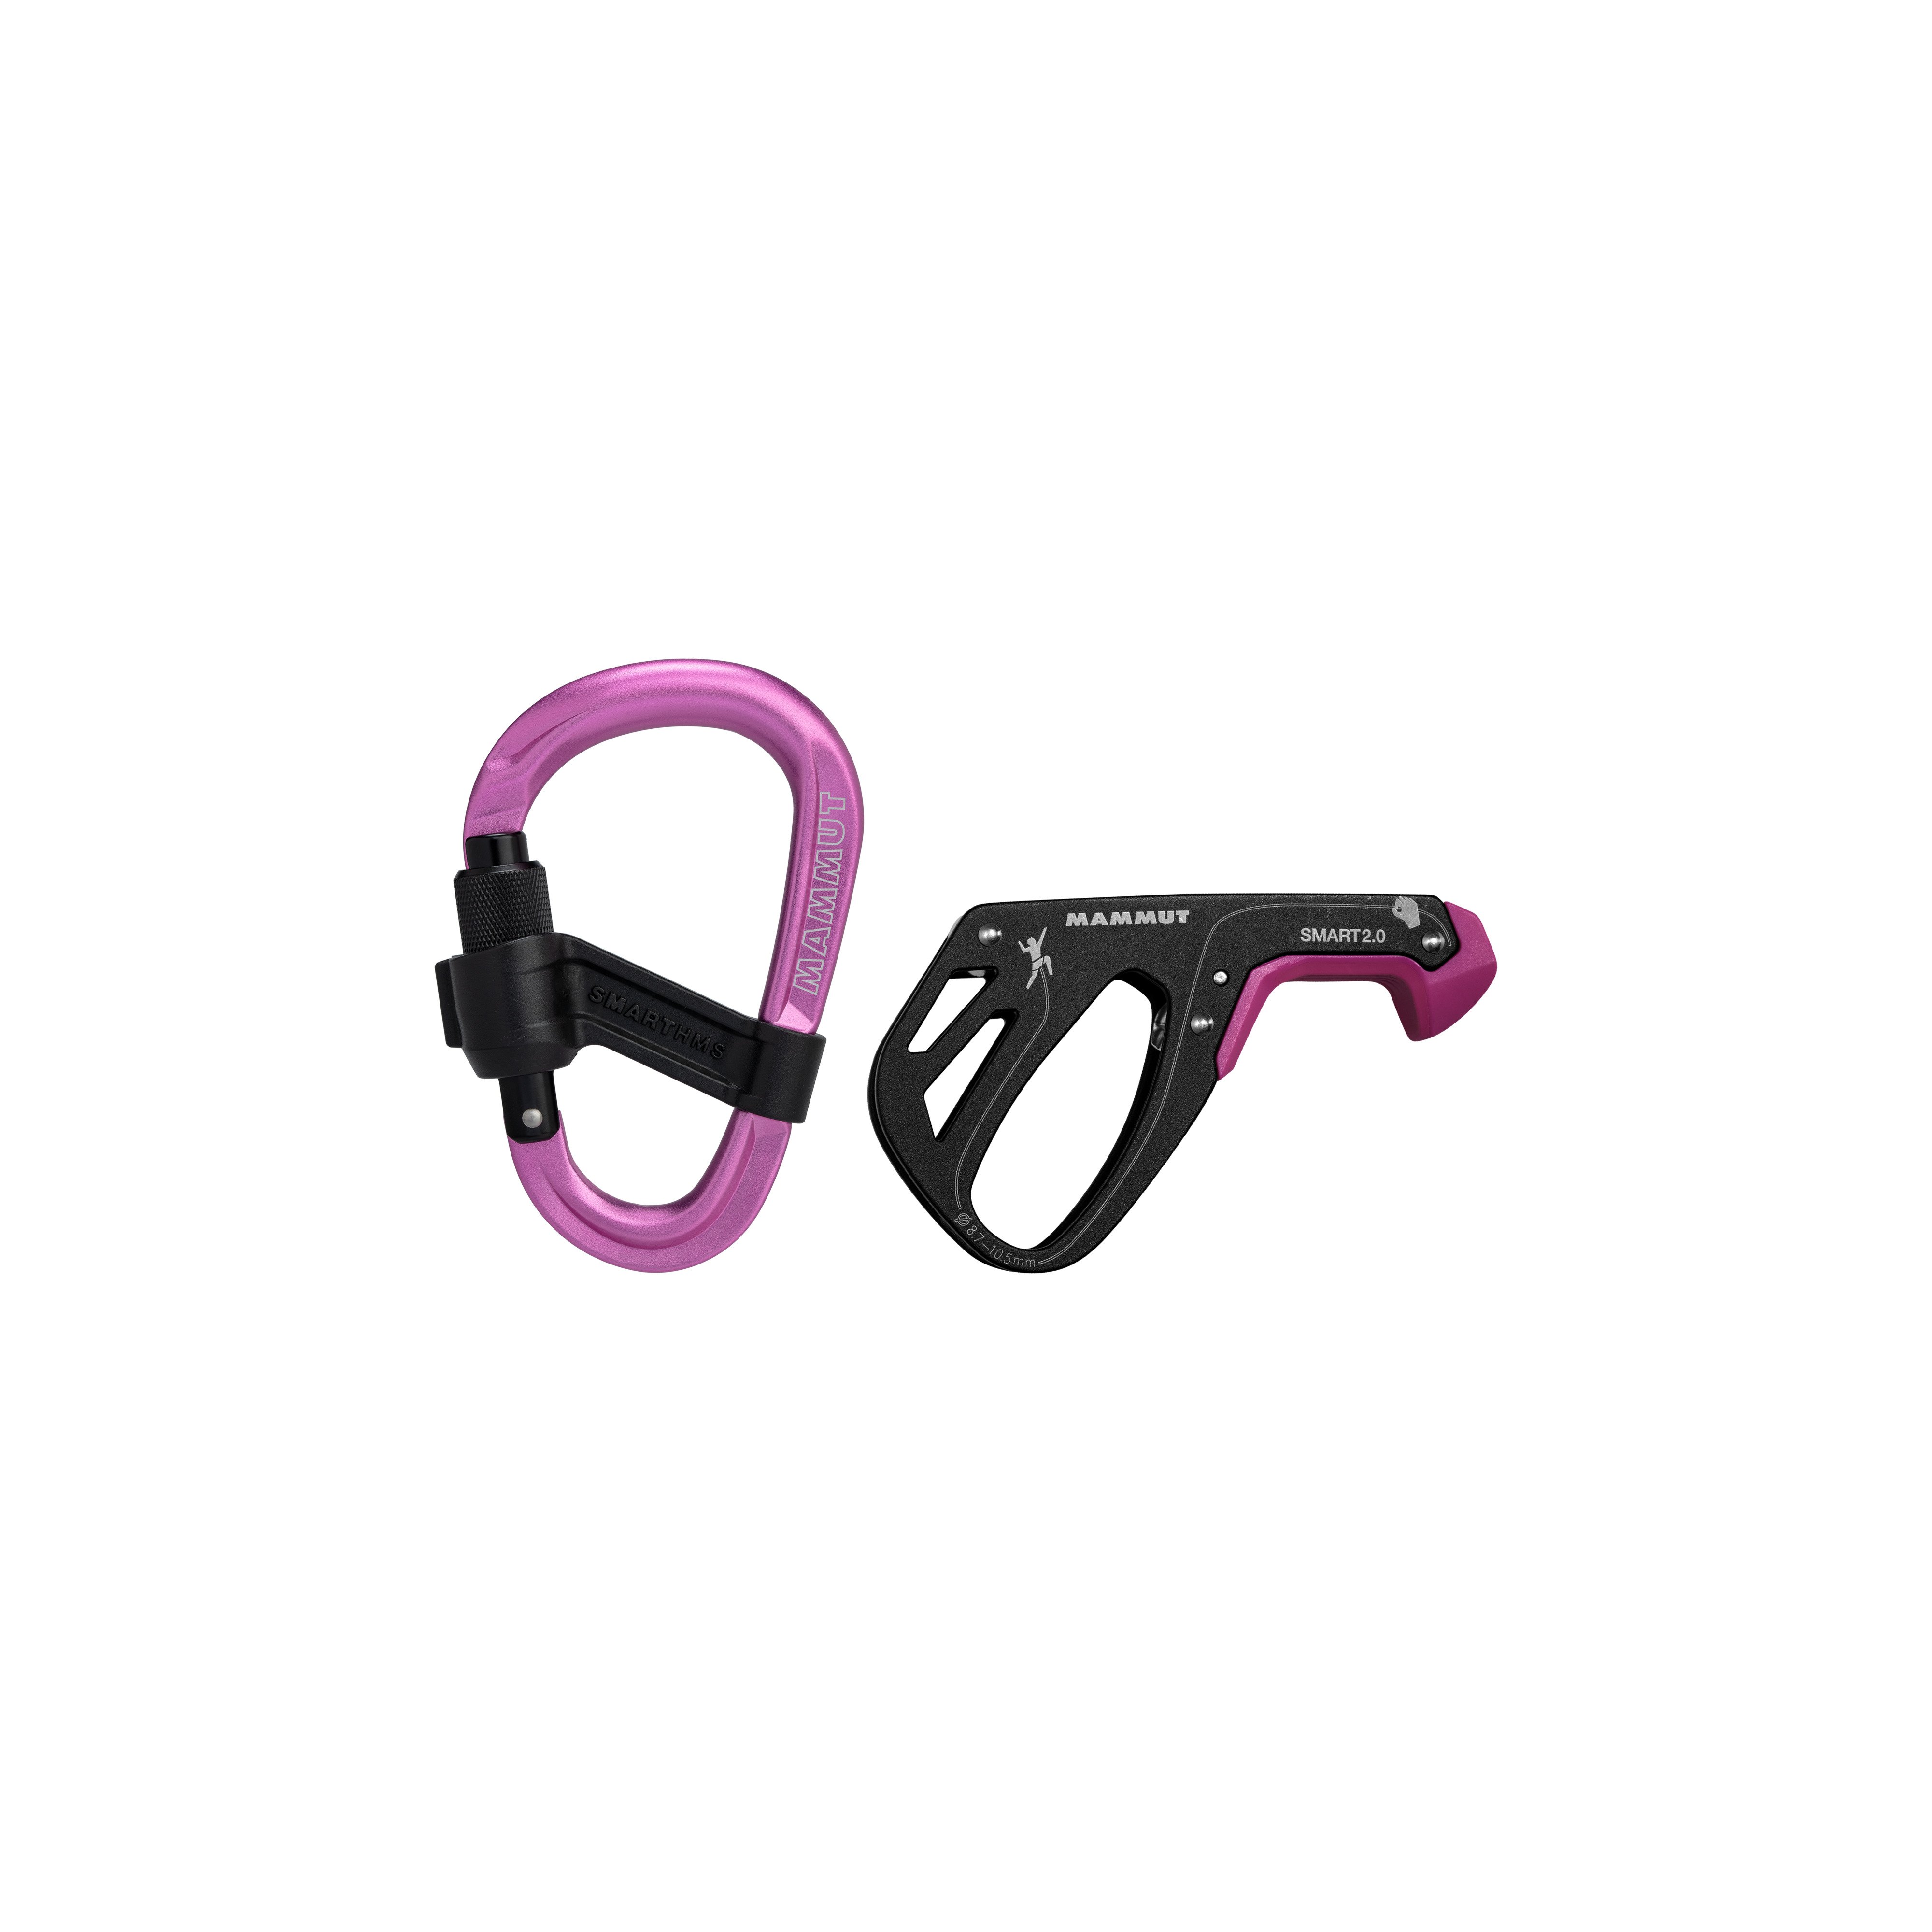 Smart 2.0 Belay Package - pink, one size product image